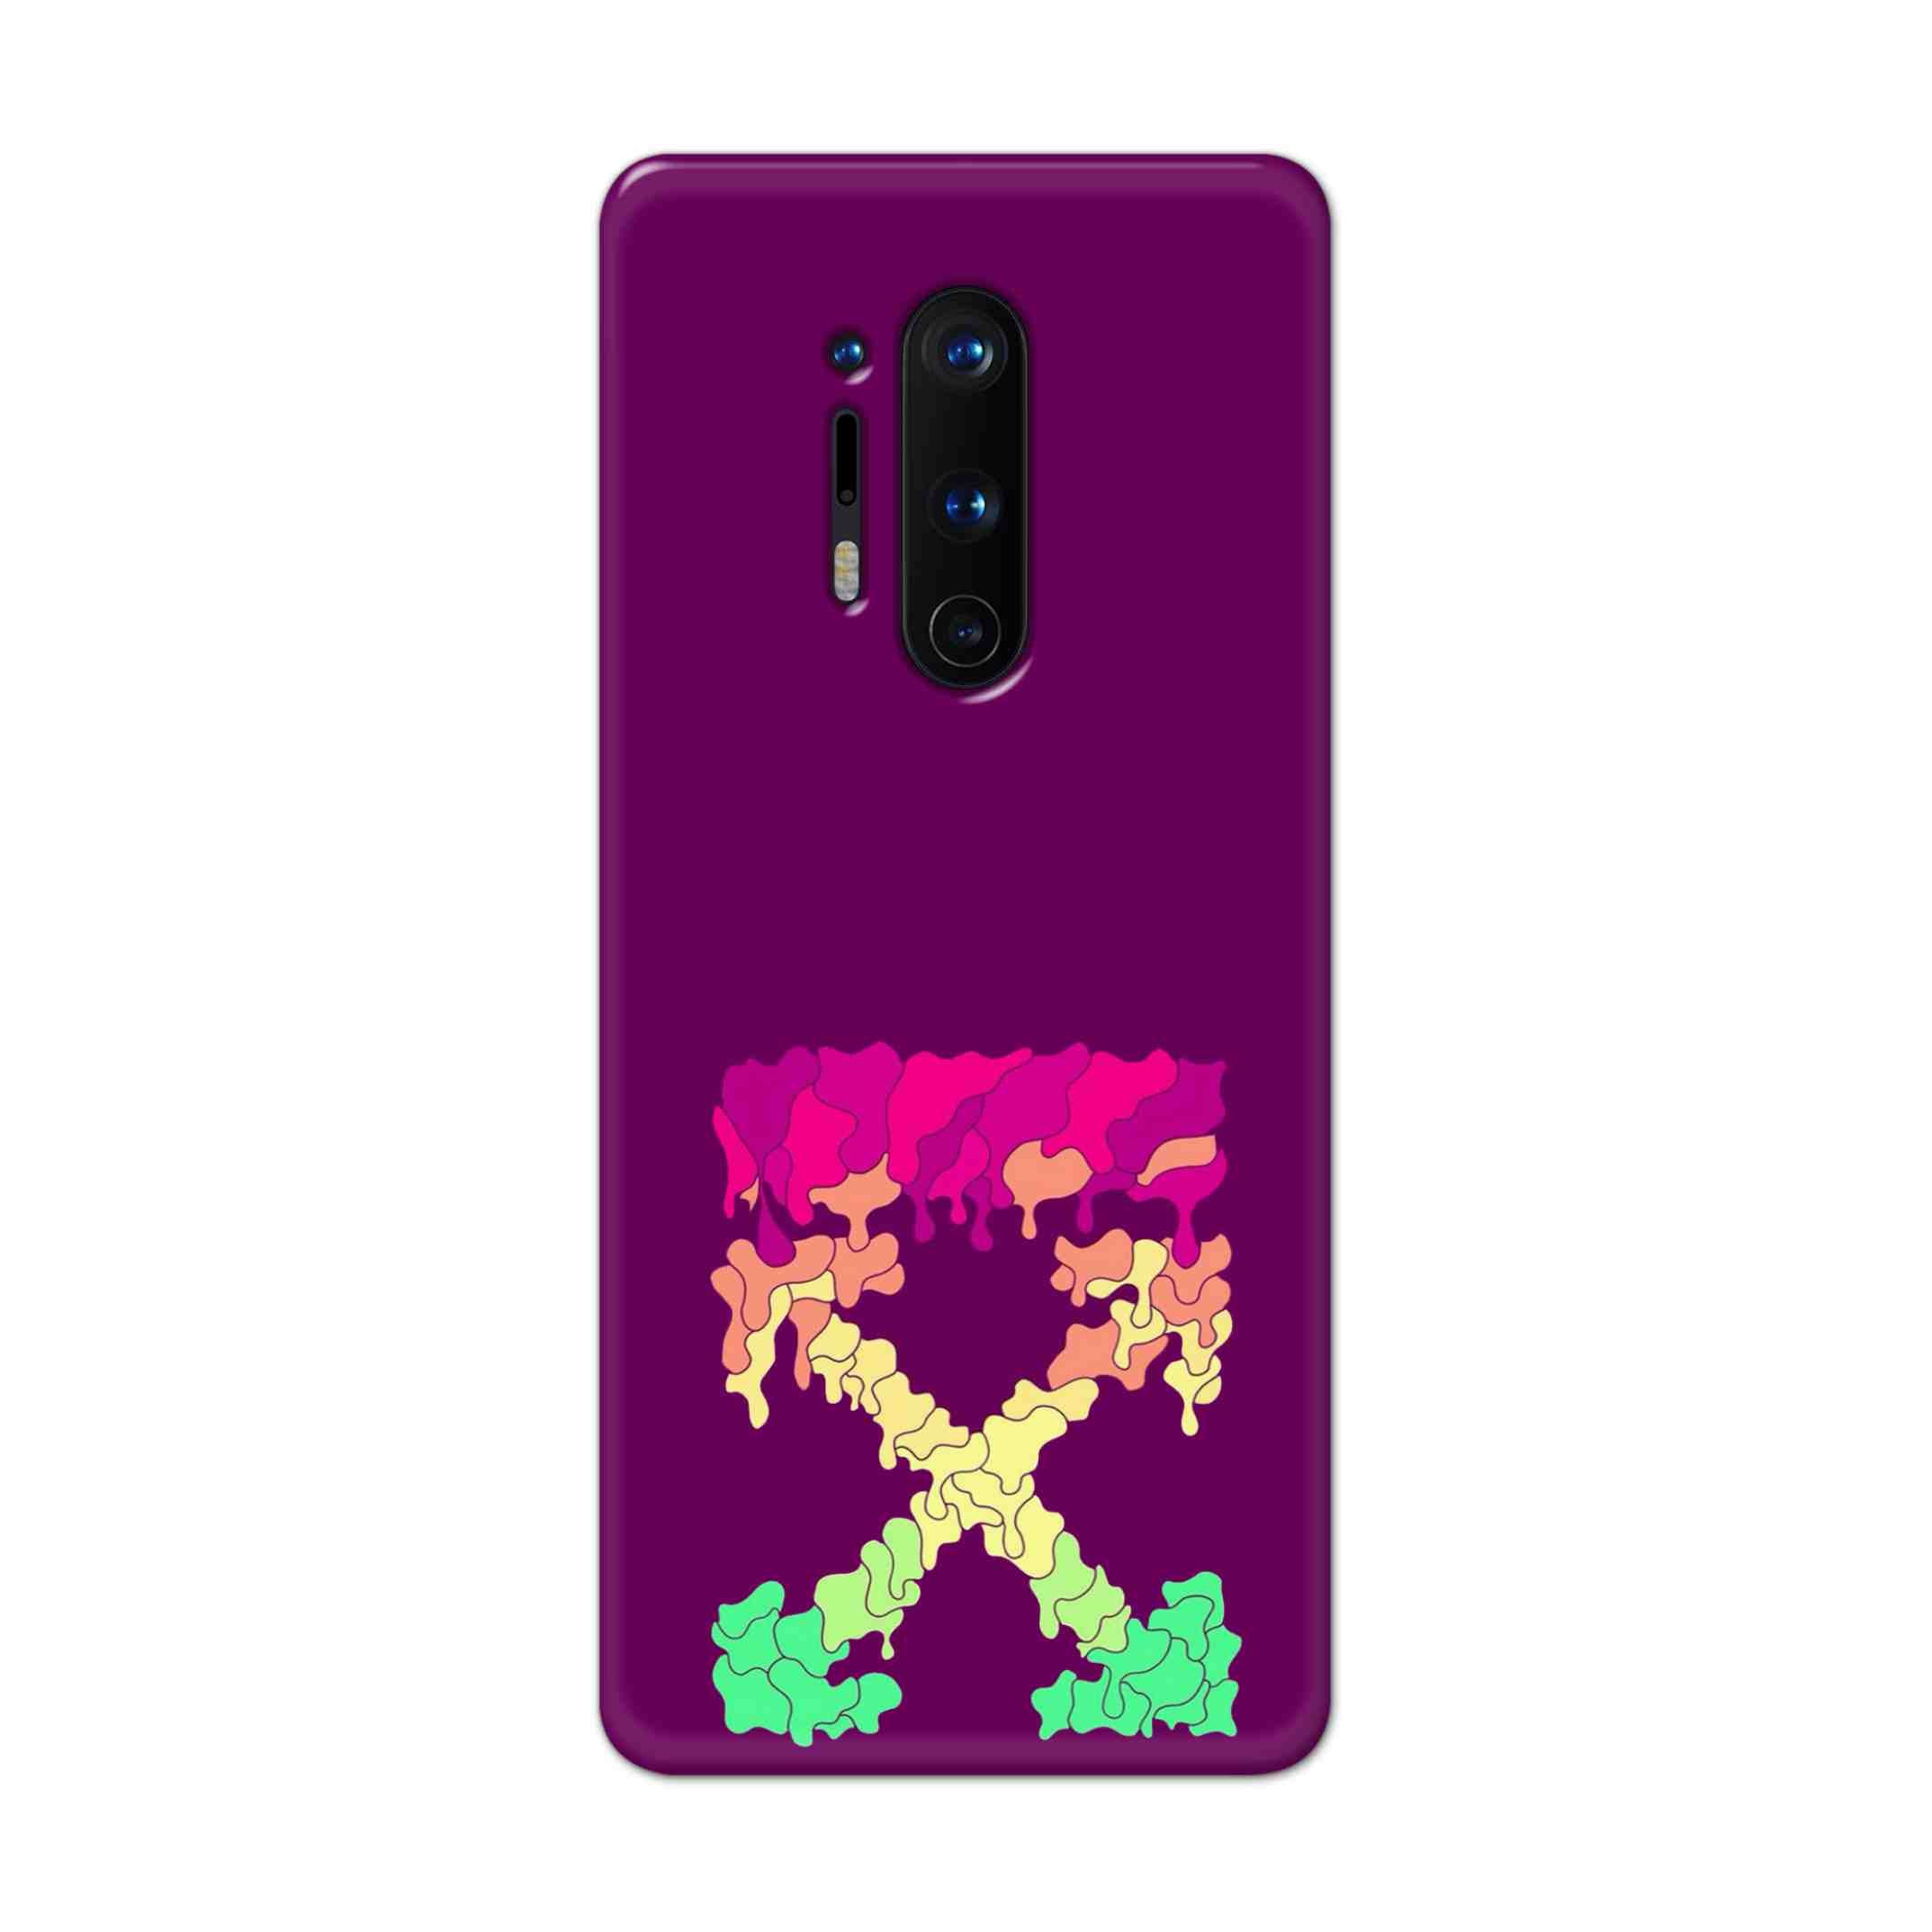 Buy X.O Hard Back Mobile Phone Case Cover For OnePlus 8 Pro Online